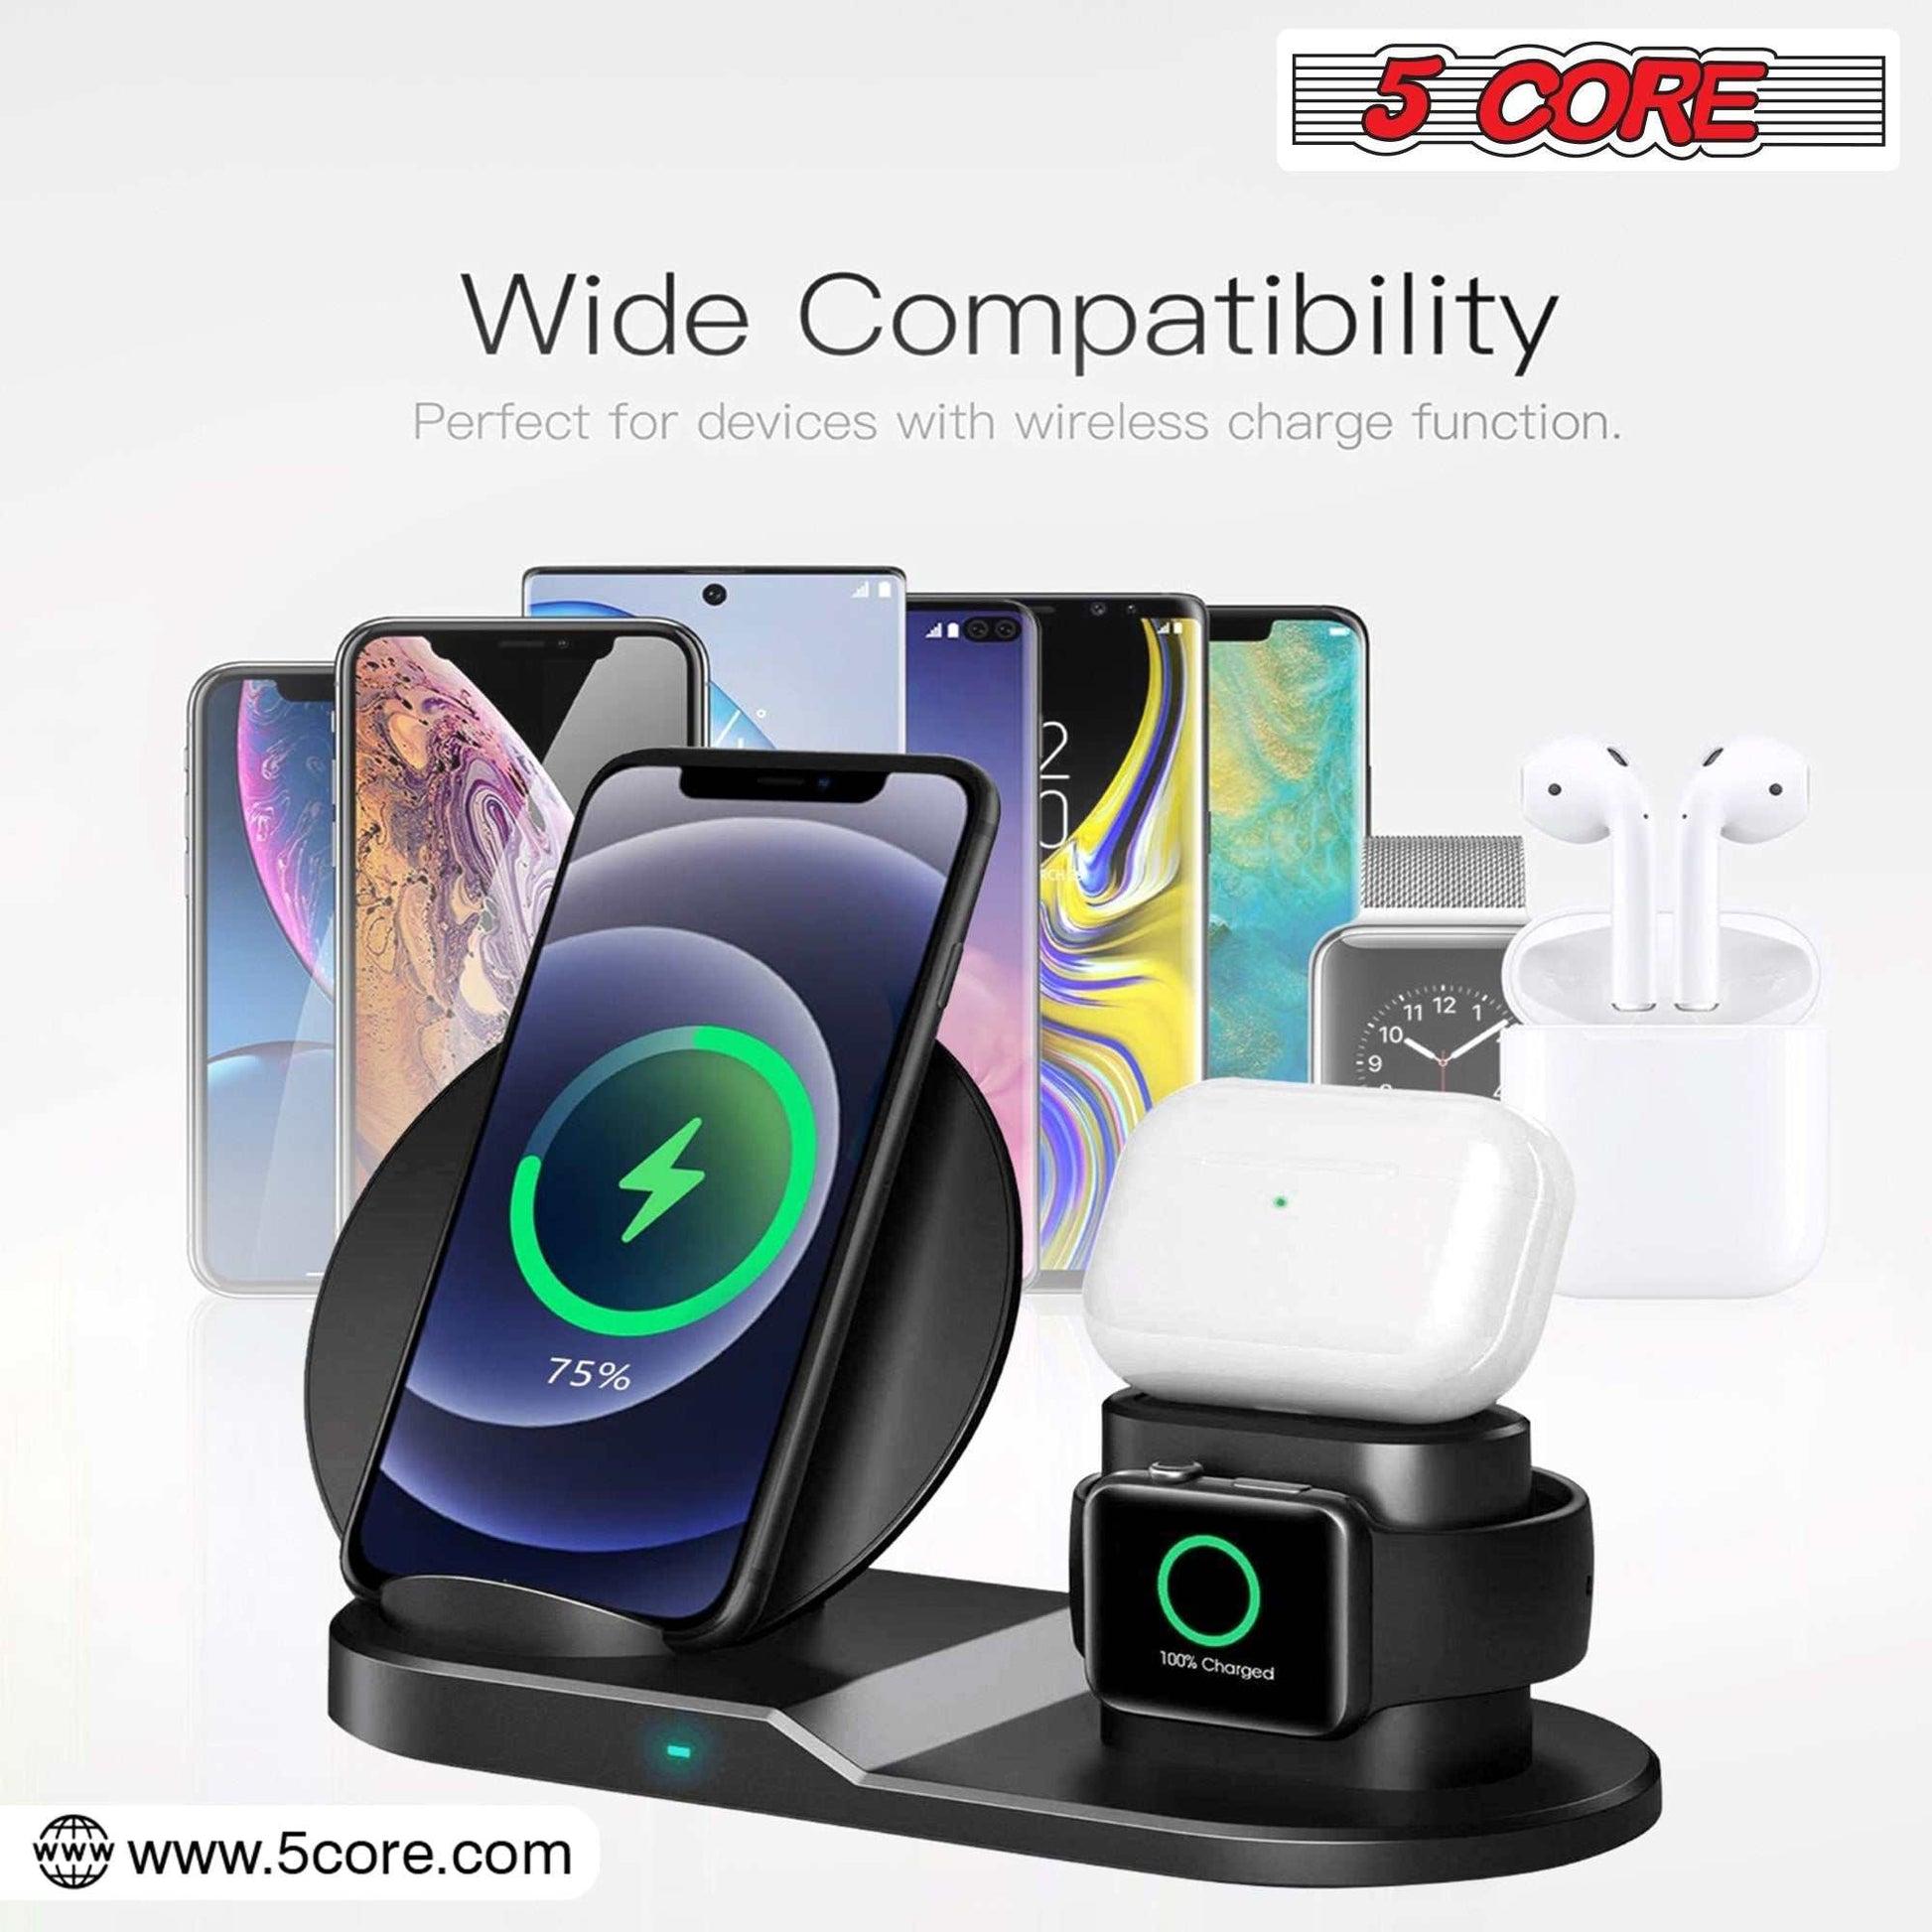 Wireless Charging Station 3 in 1 Wireless Charger Stand QI Fast Wireless Charging W Dual Coil for Samsung Iphone for Apple Watch Airpod -WCR 3